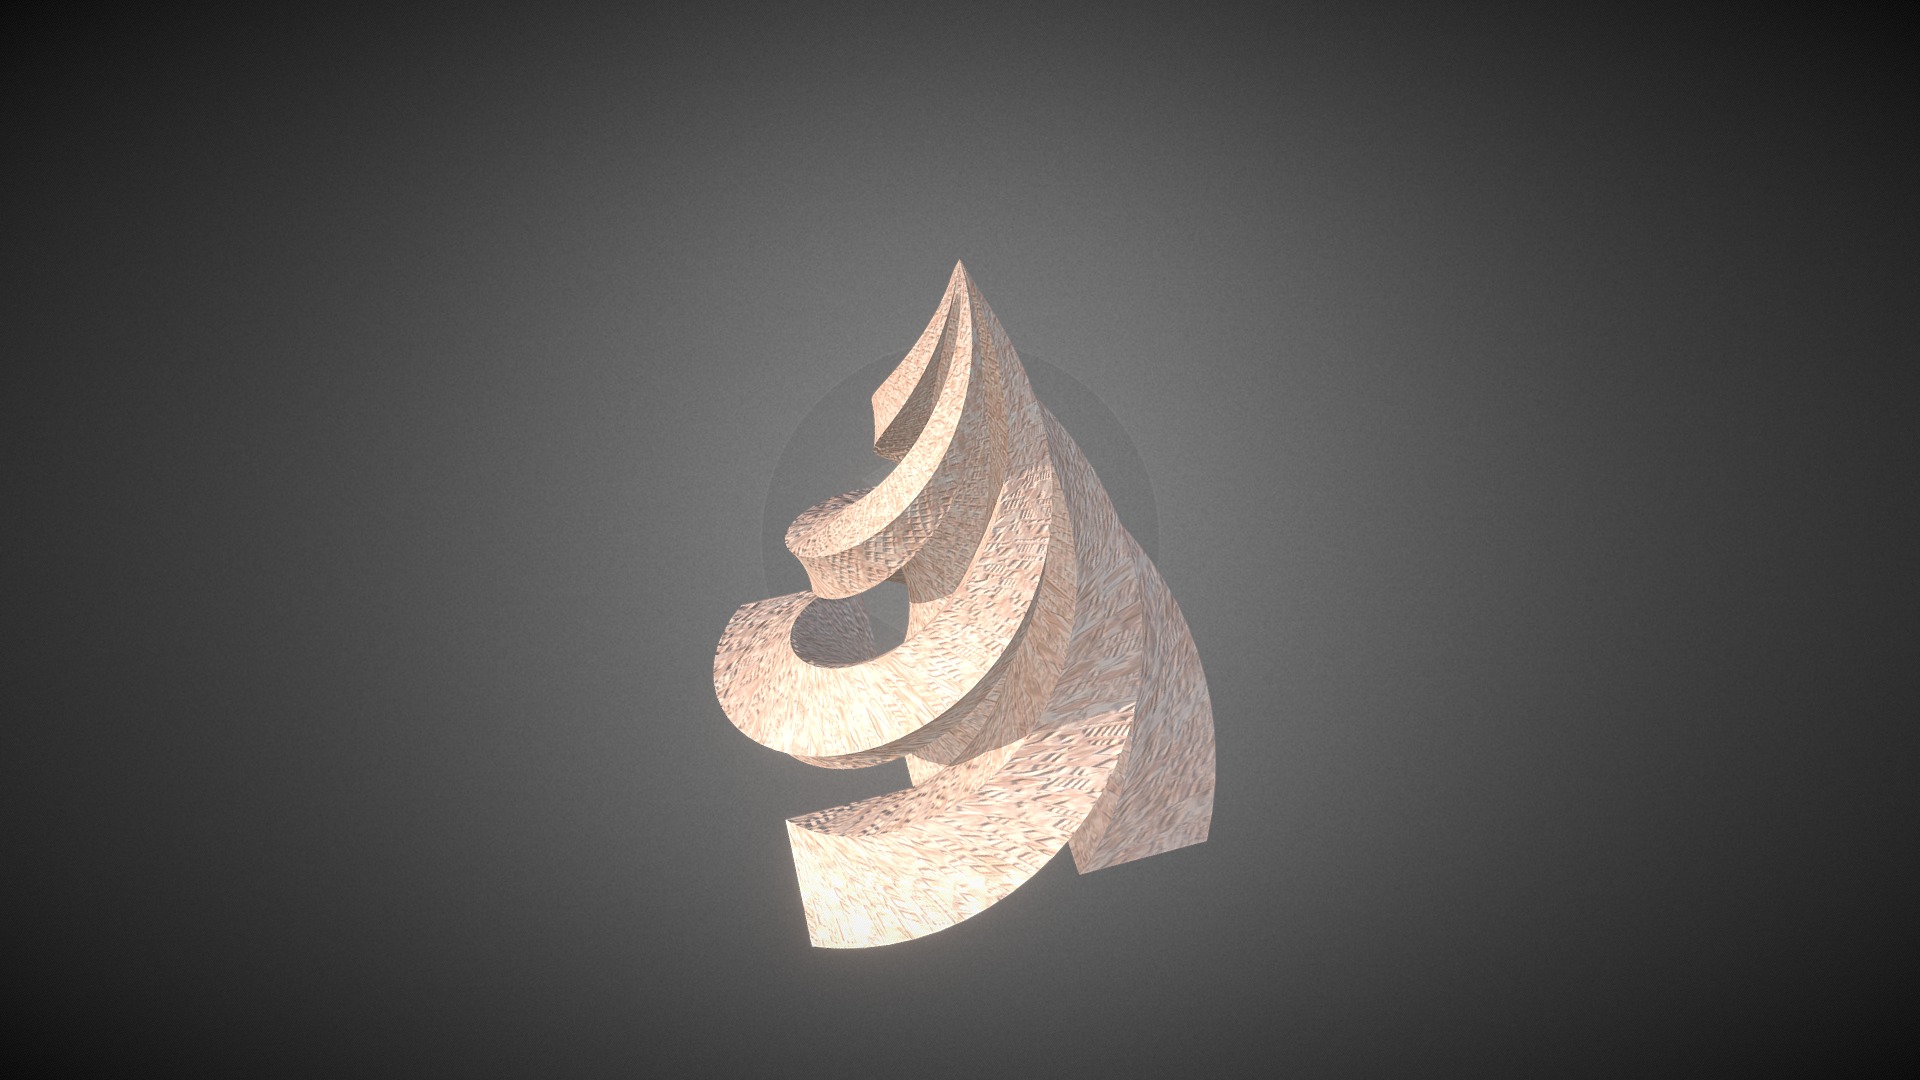 3D model Pyramid skyscraper - This is a 3D model of the Pyramid skyscraper. The 3D model is about a paper lantern with a black background.